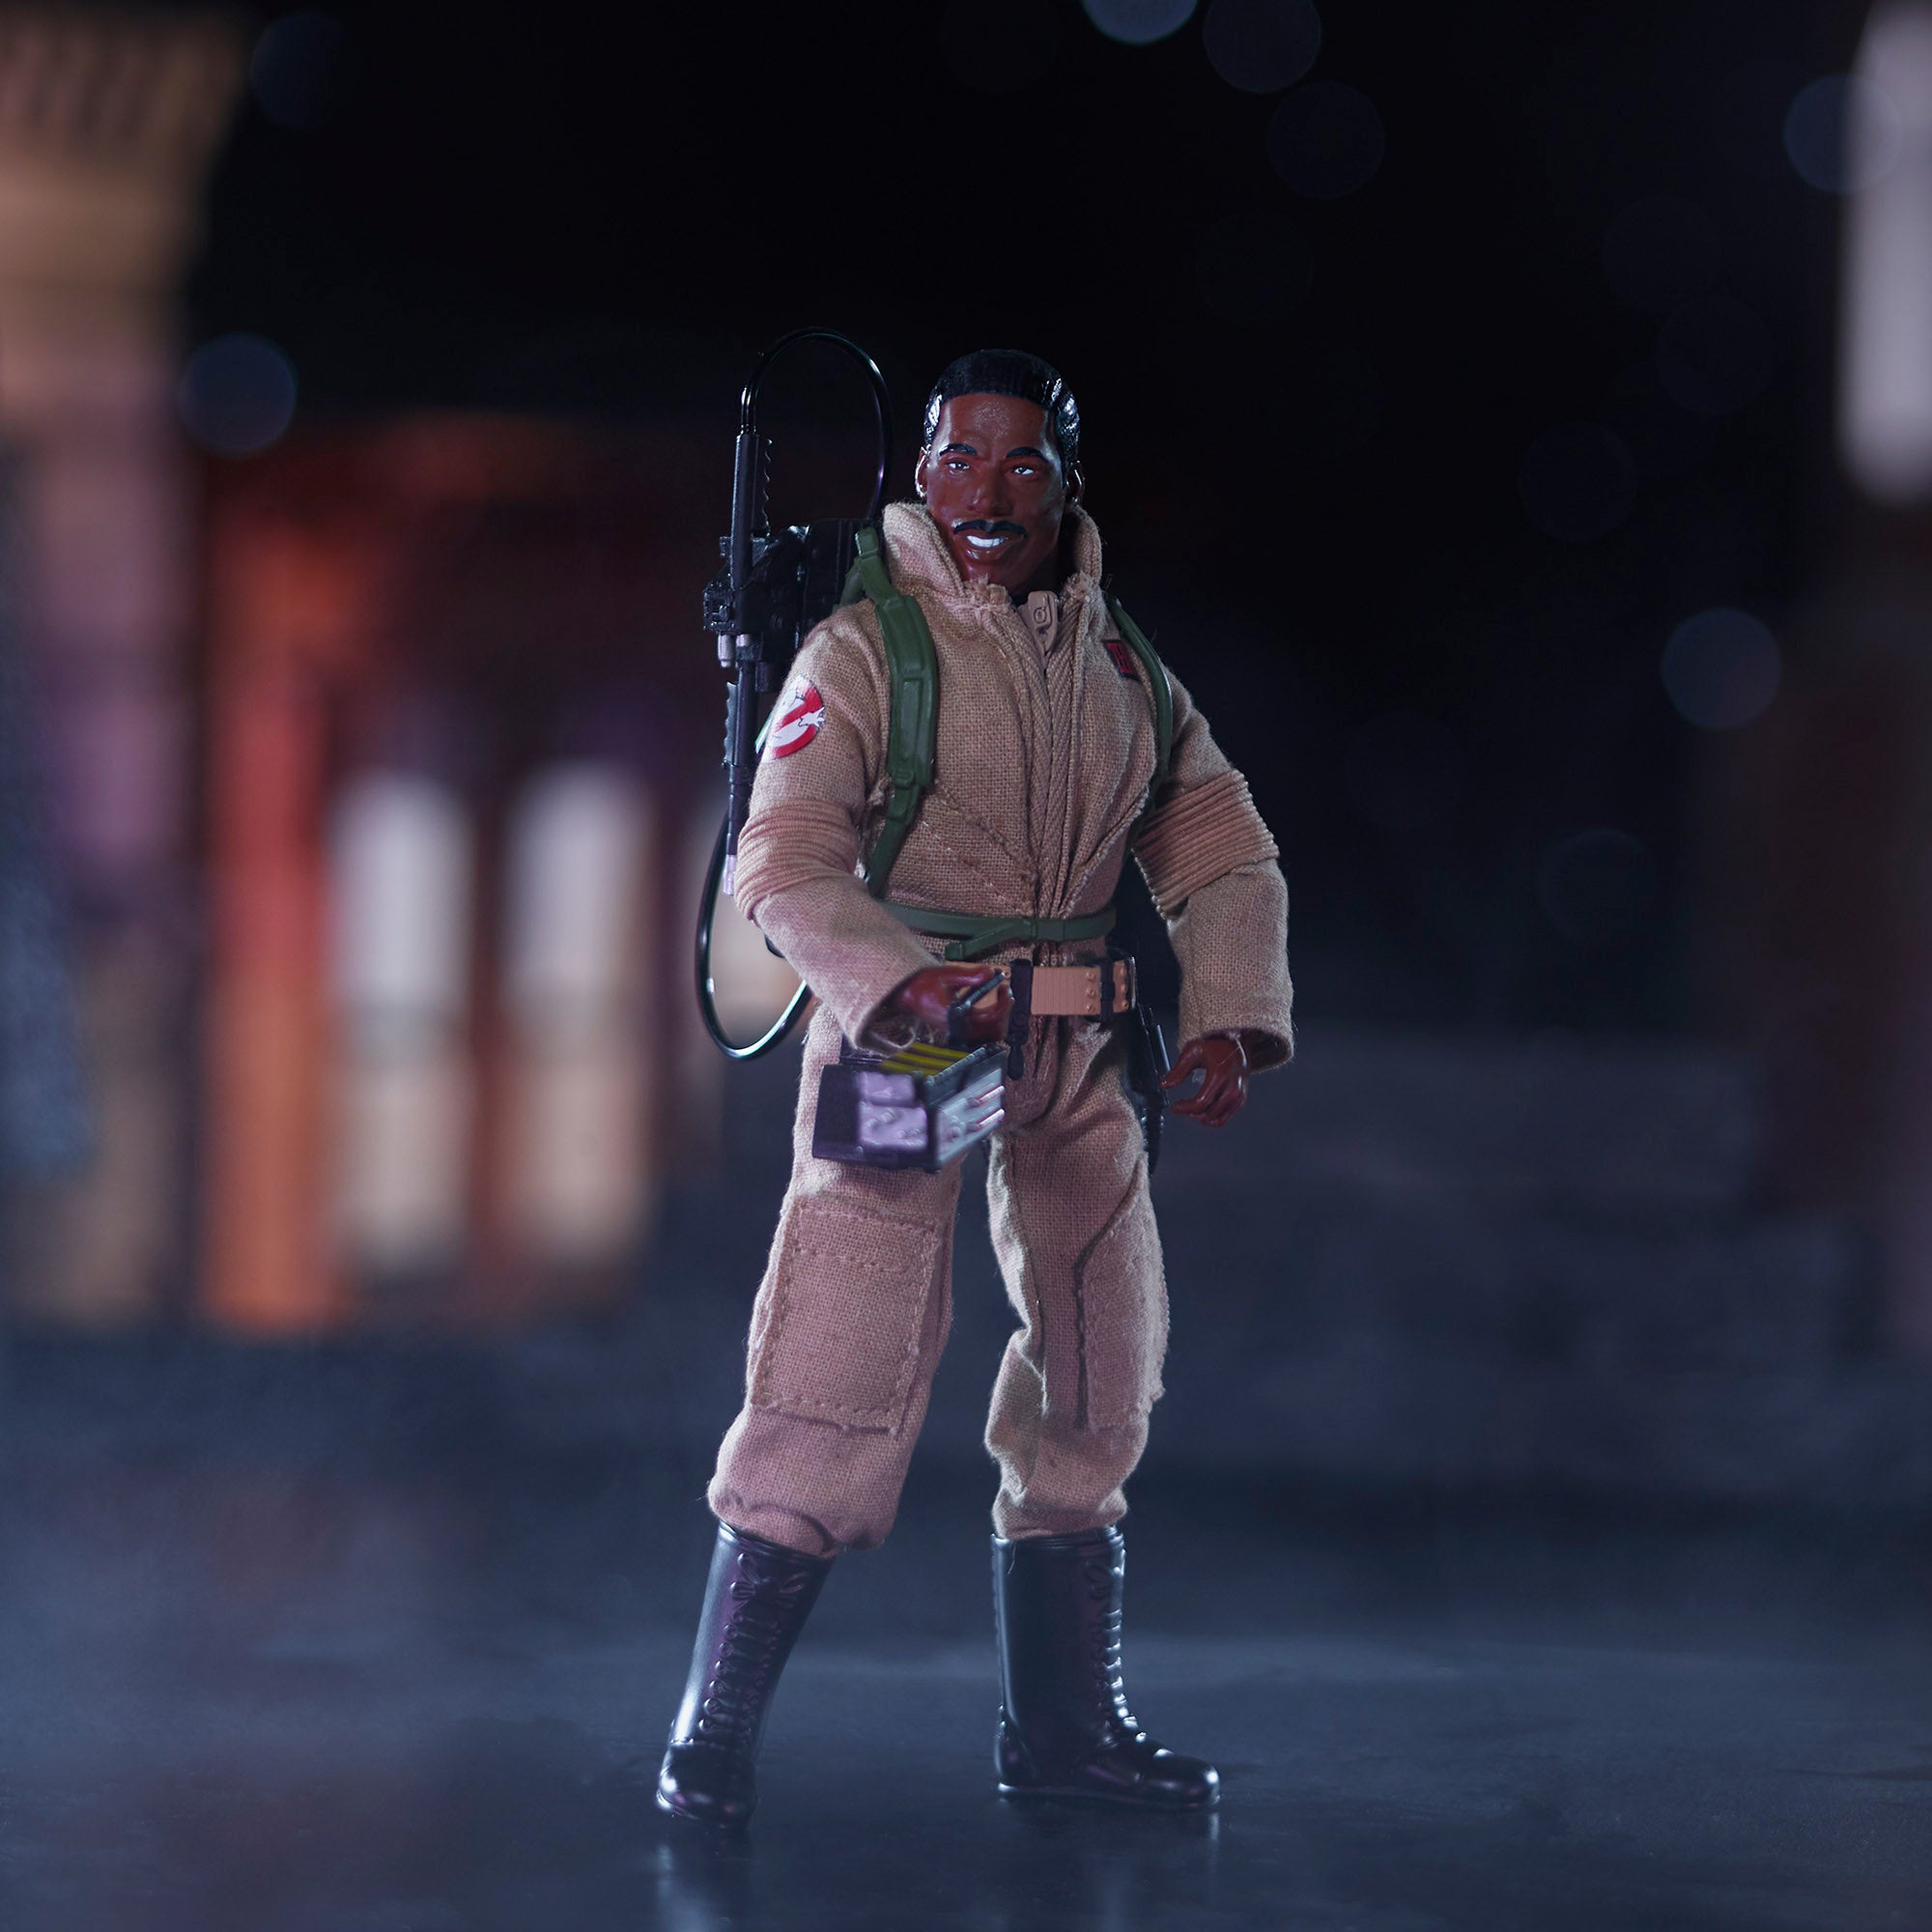 Ghostbusters x Mego 11